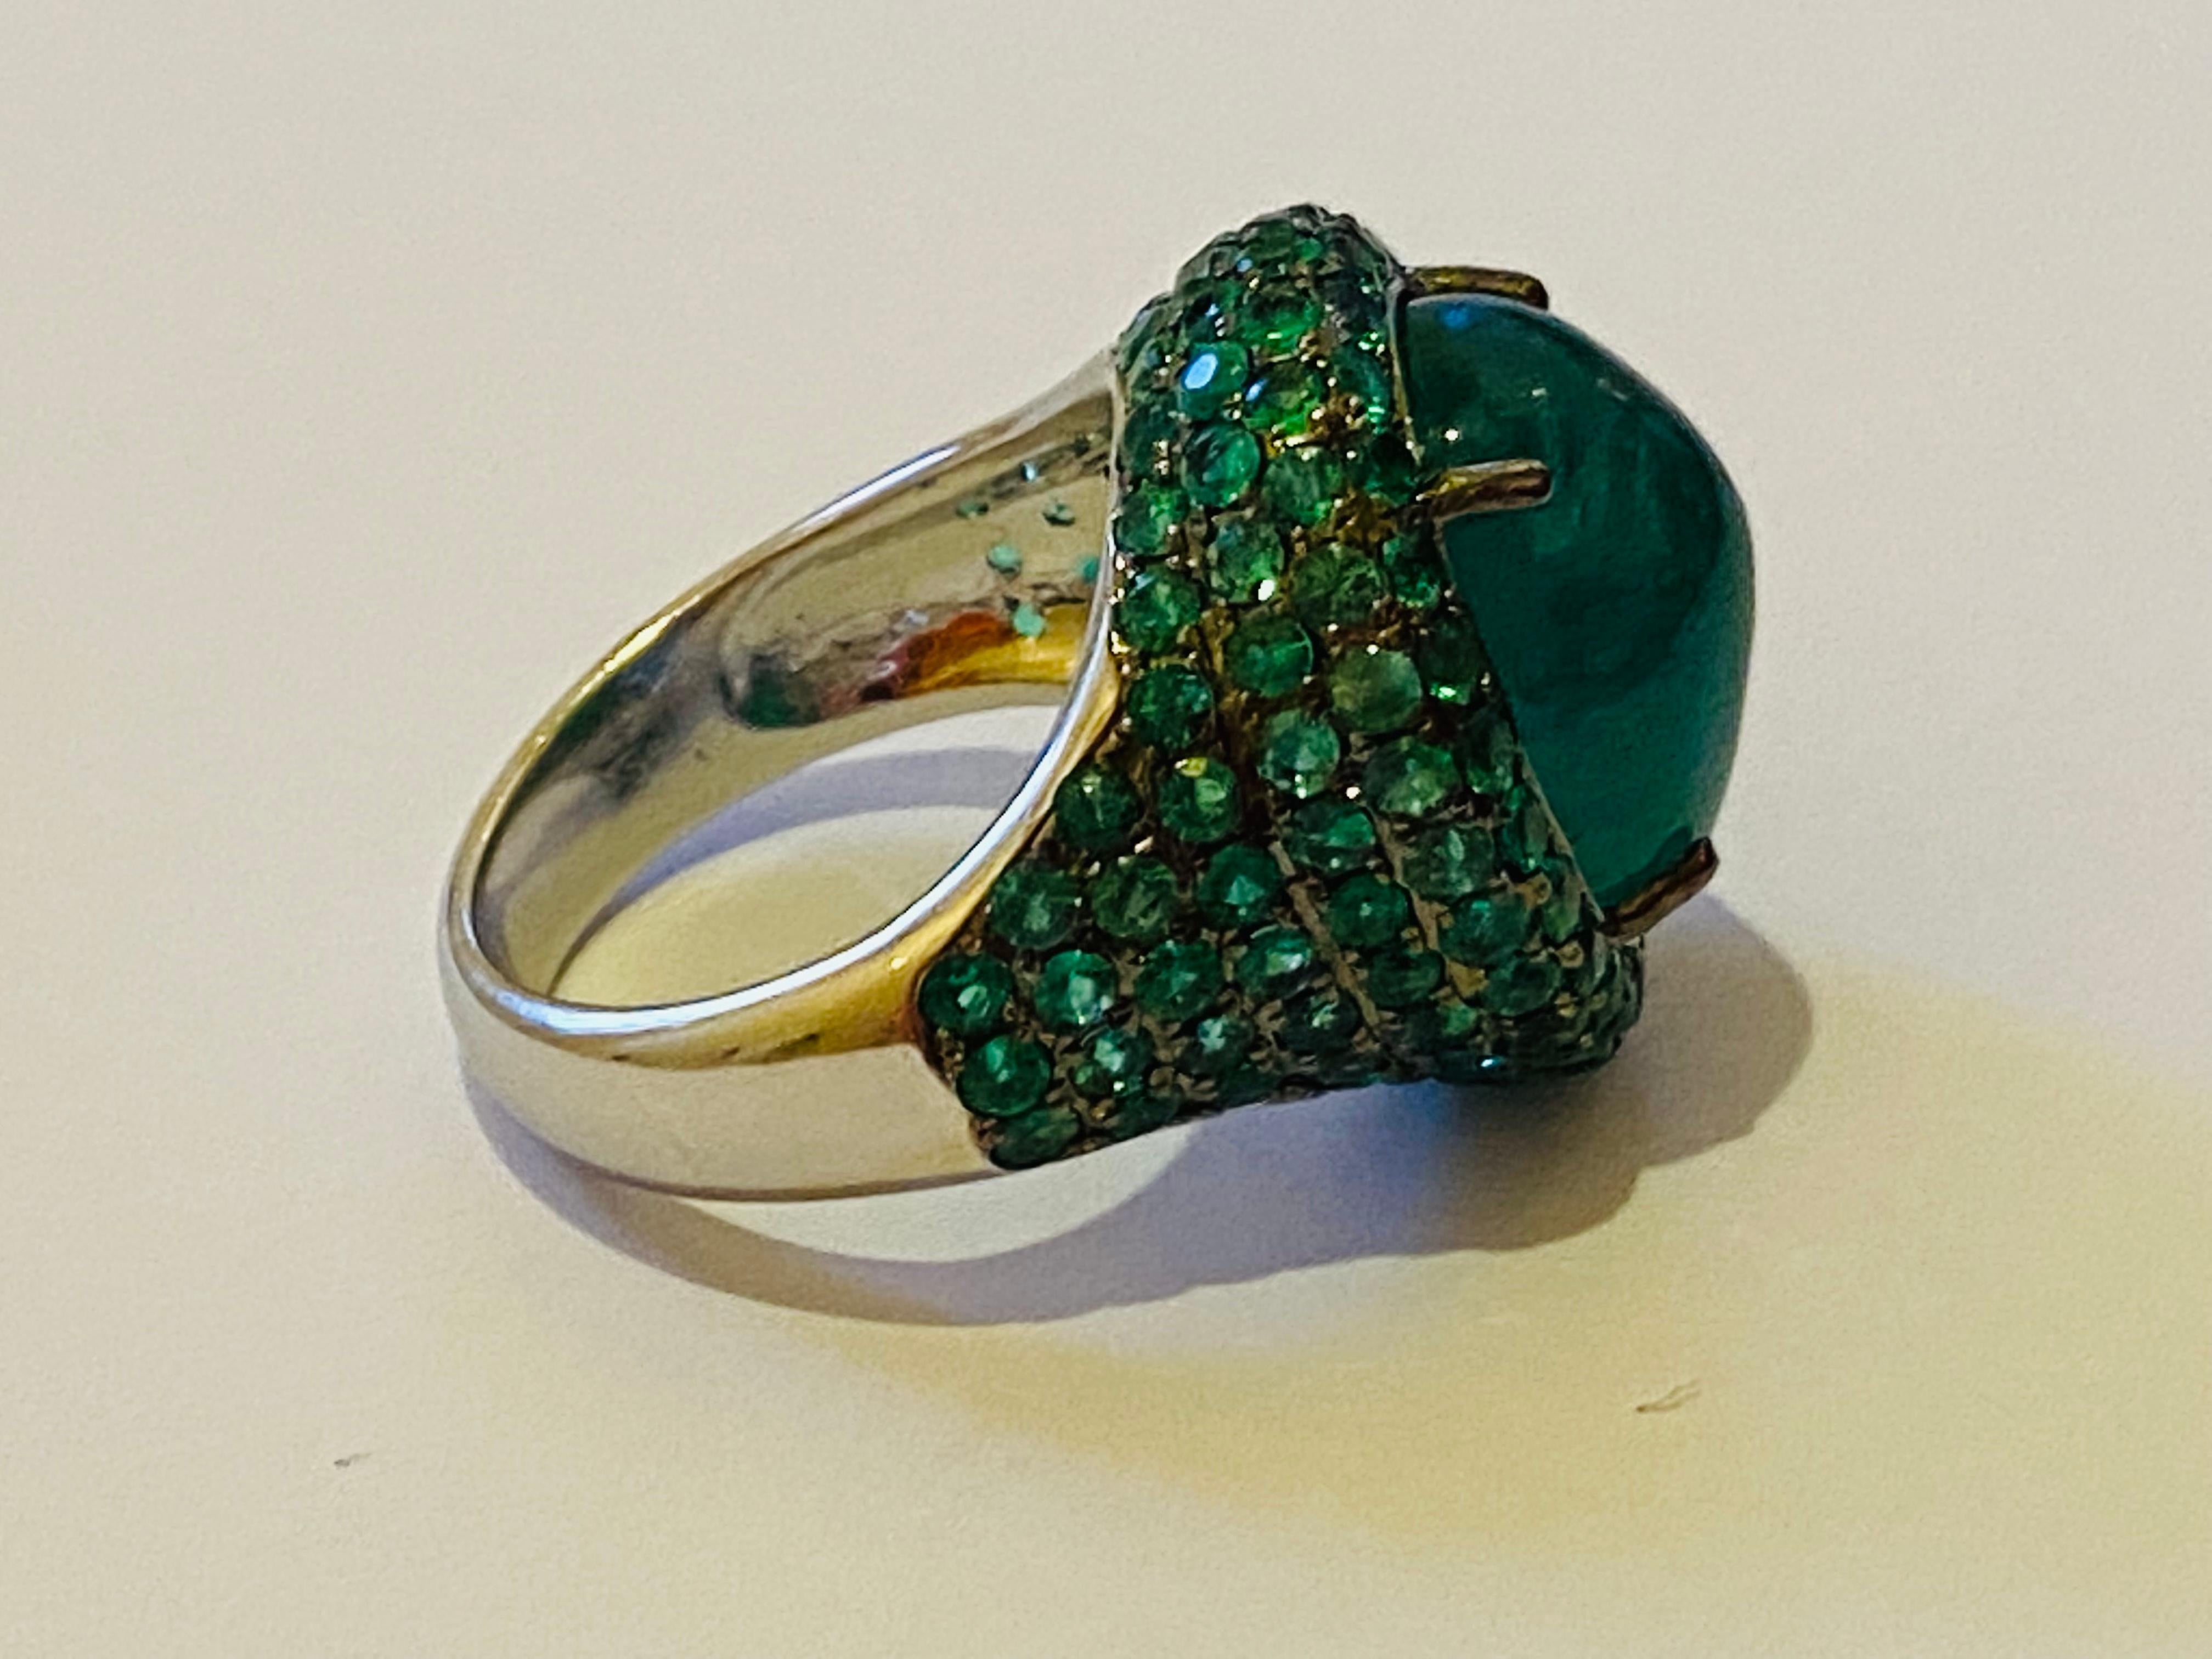 Cabochon  AIG Certified 10 Carat Zambian Emerald 18K Gold Ring For Sale